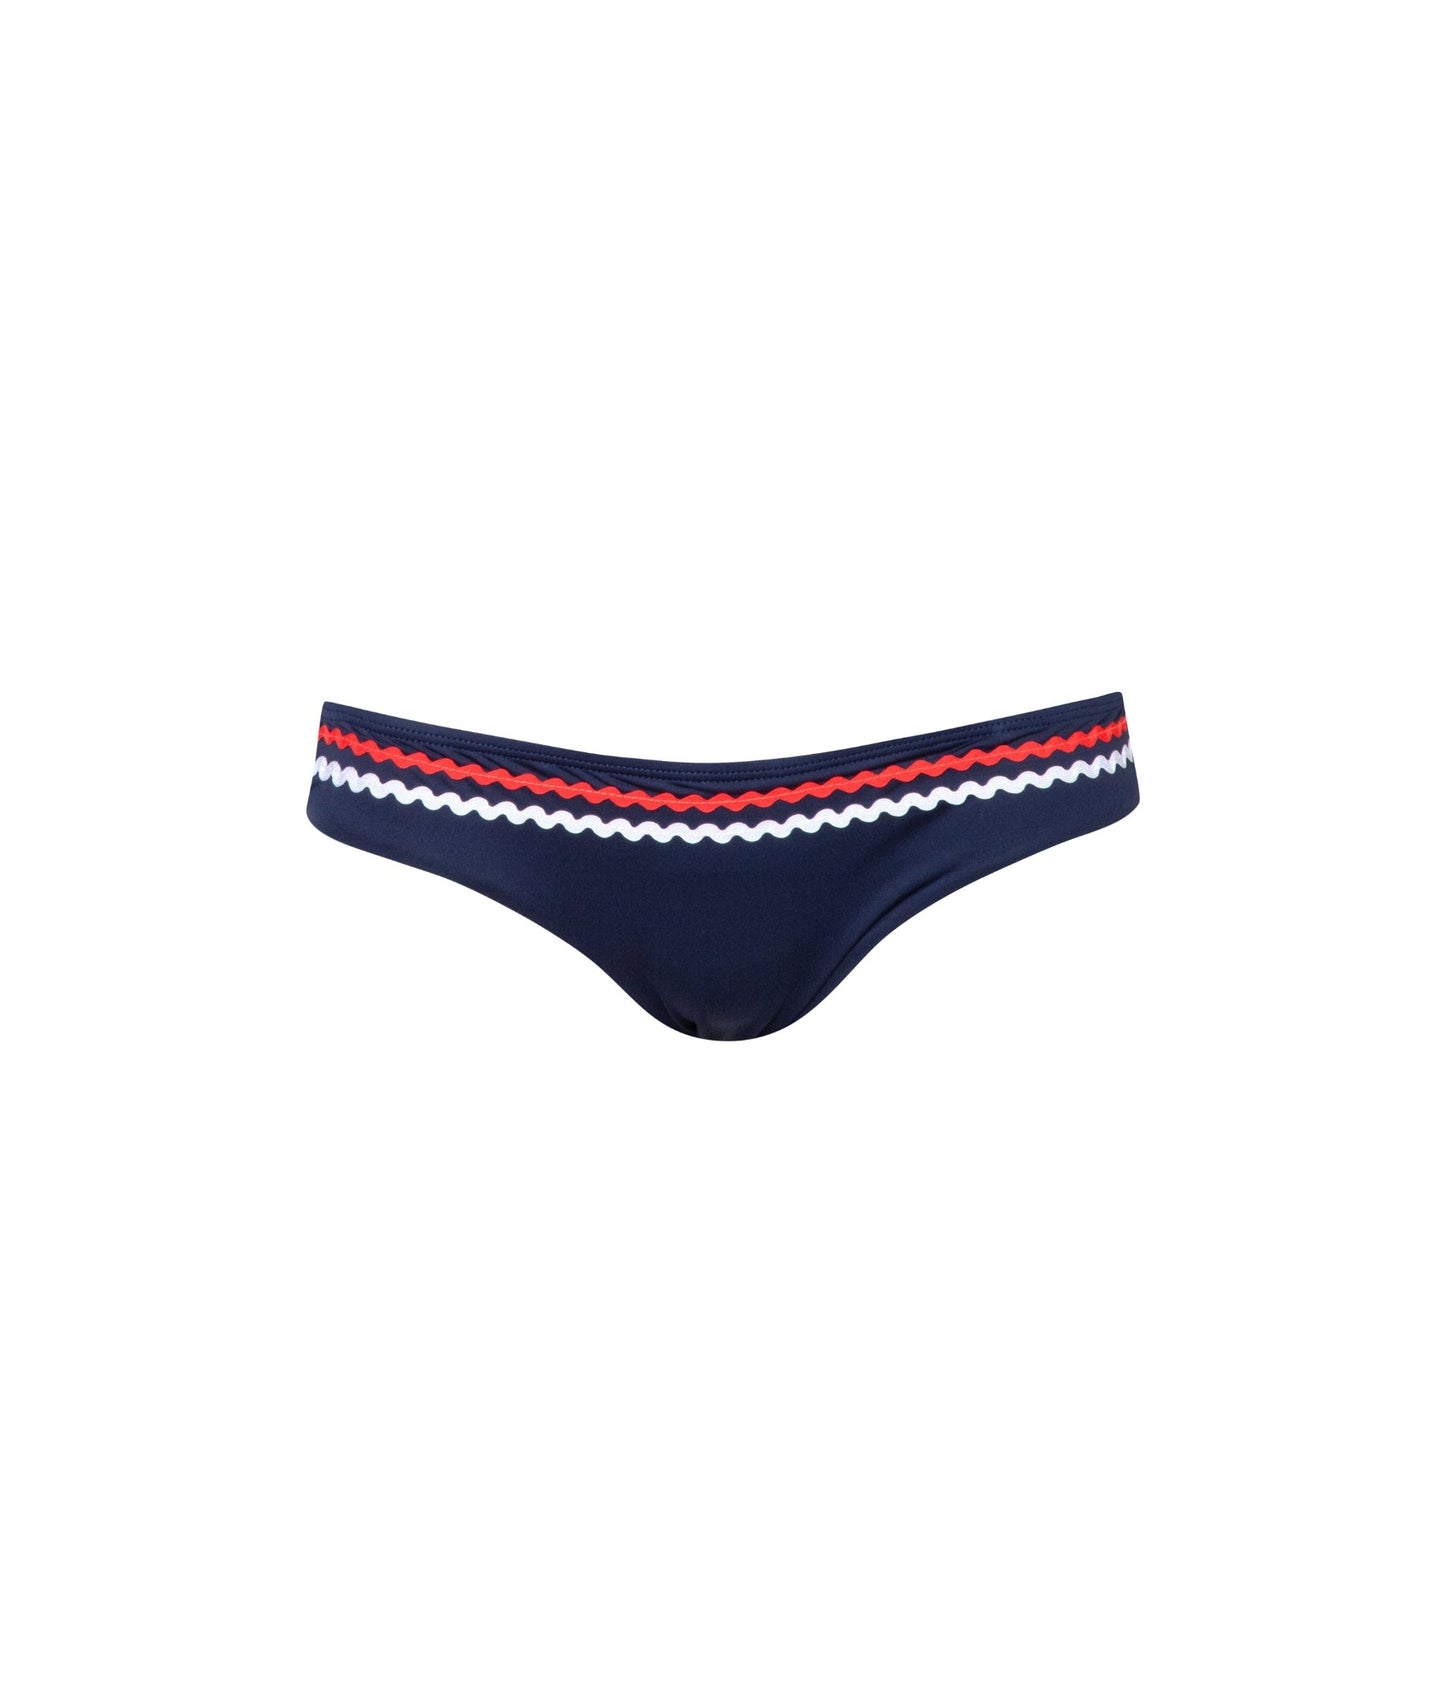 Verdelimon - Bottom - Tunas  - Les Coquettes - Navy French Waves - Front